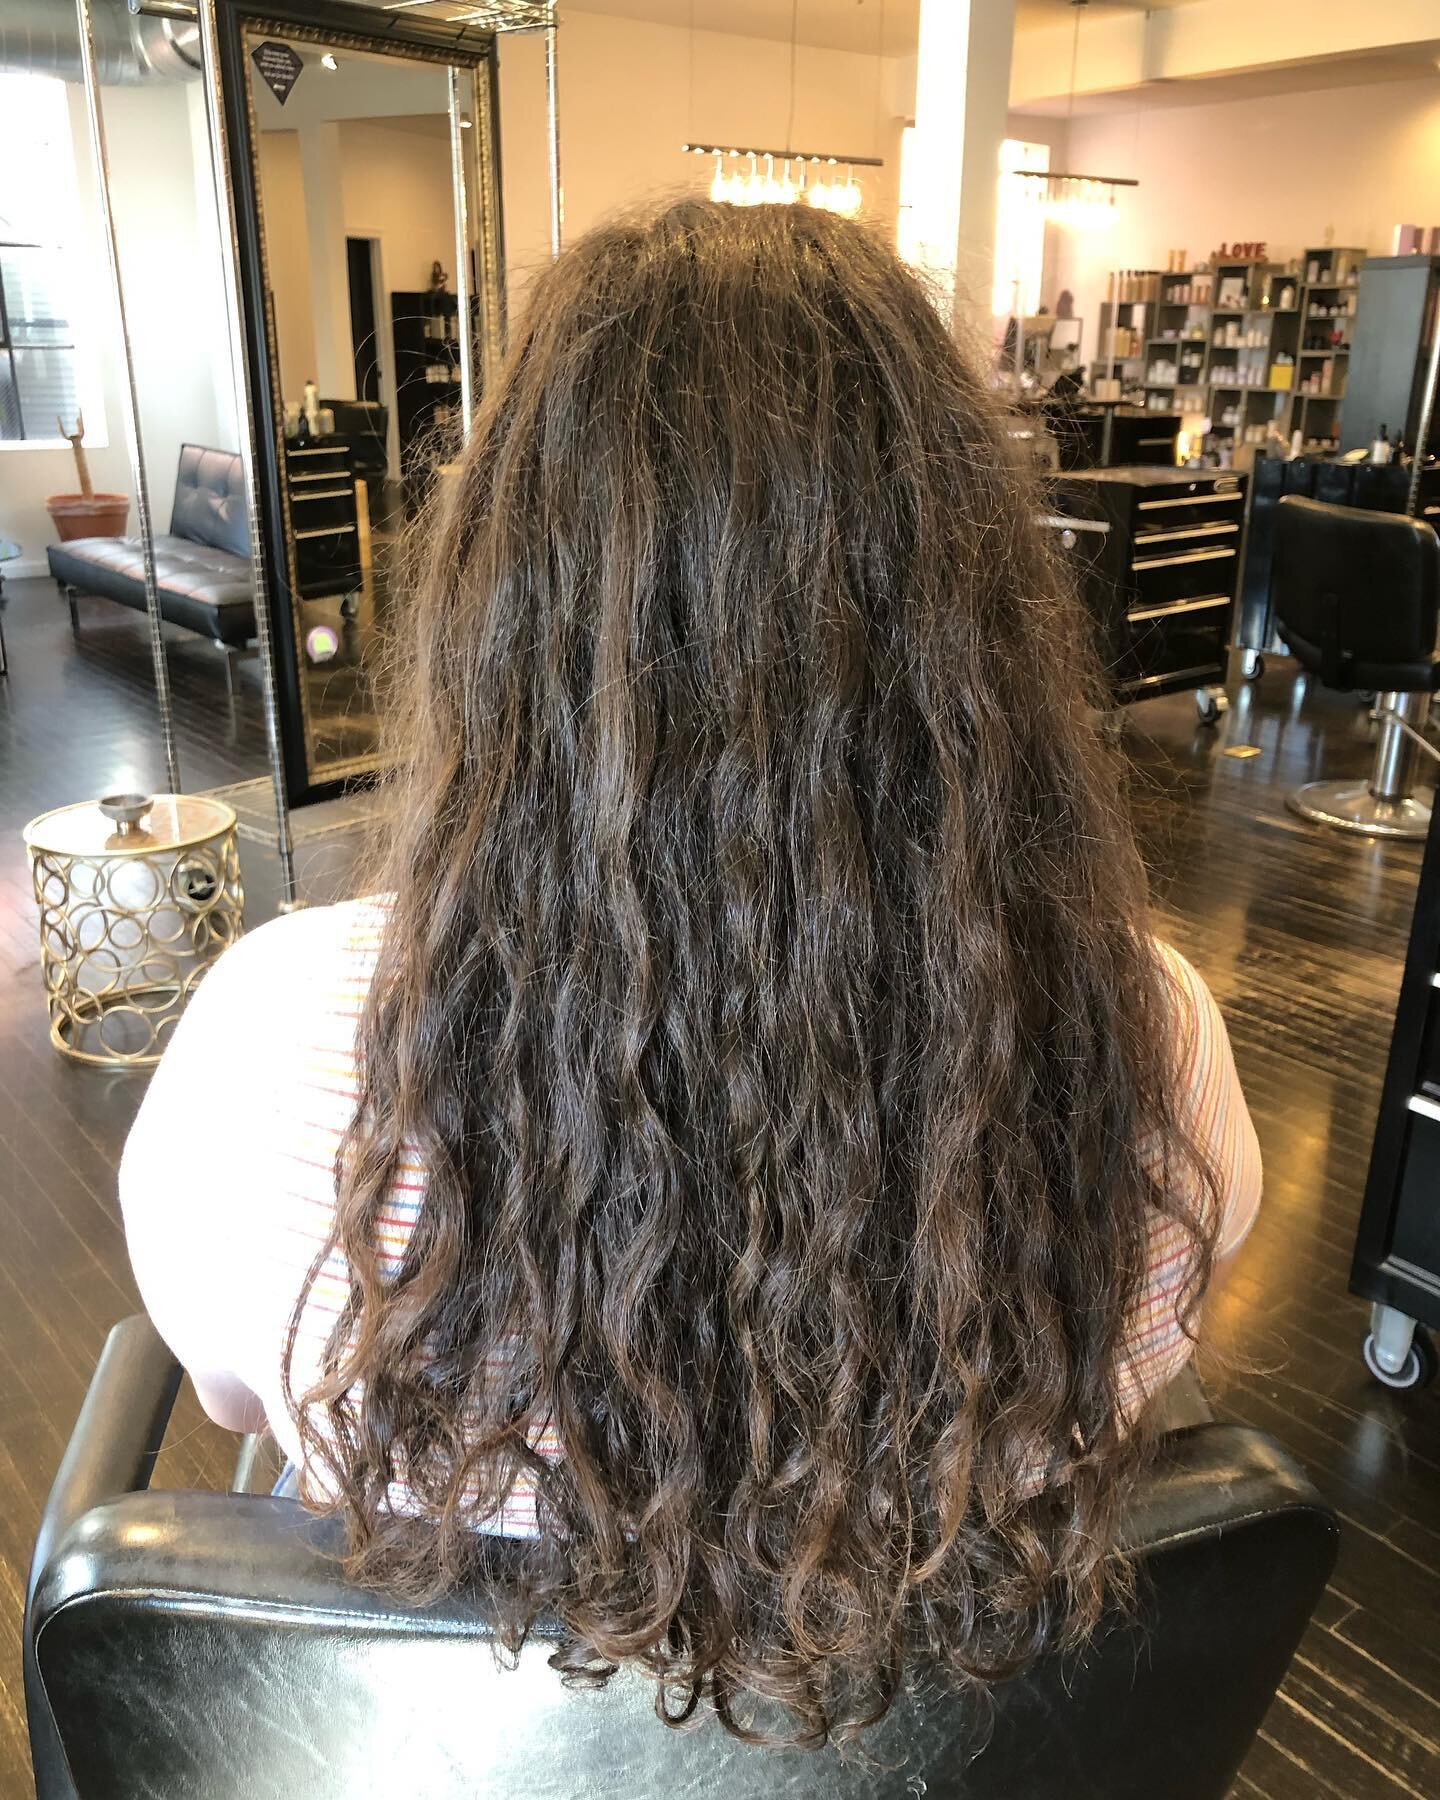 A big cut and some self care for this new mom by @carrieh74!! An easy to manage, fresh look for her new adventure. Life is all about transition and change. How can we serve you in your next phase? #asalonnameddesire #beforeandafterhair #hairtransform